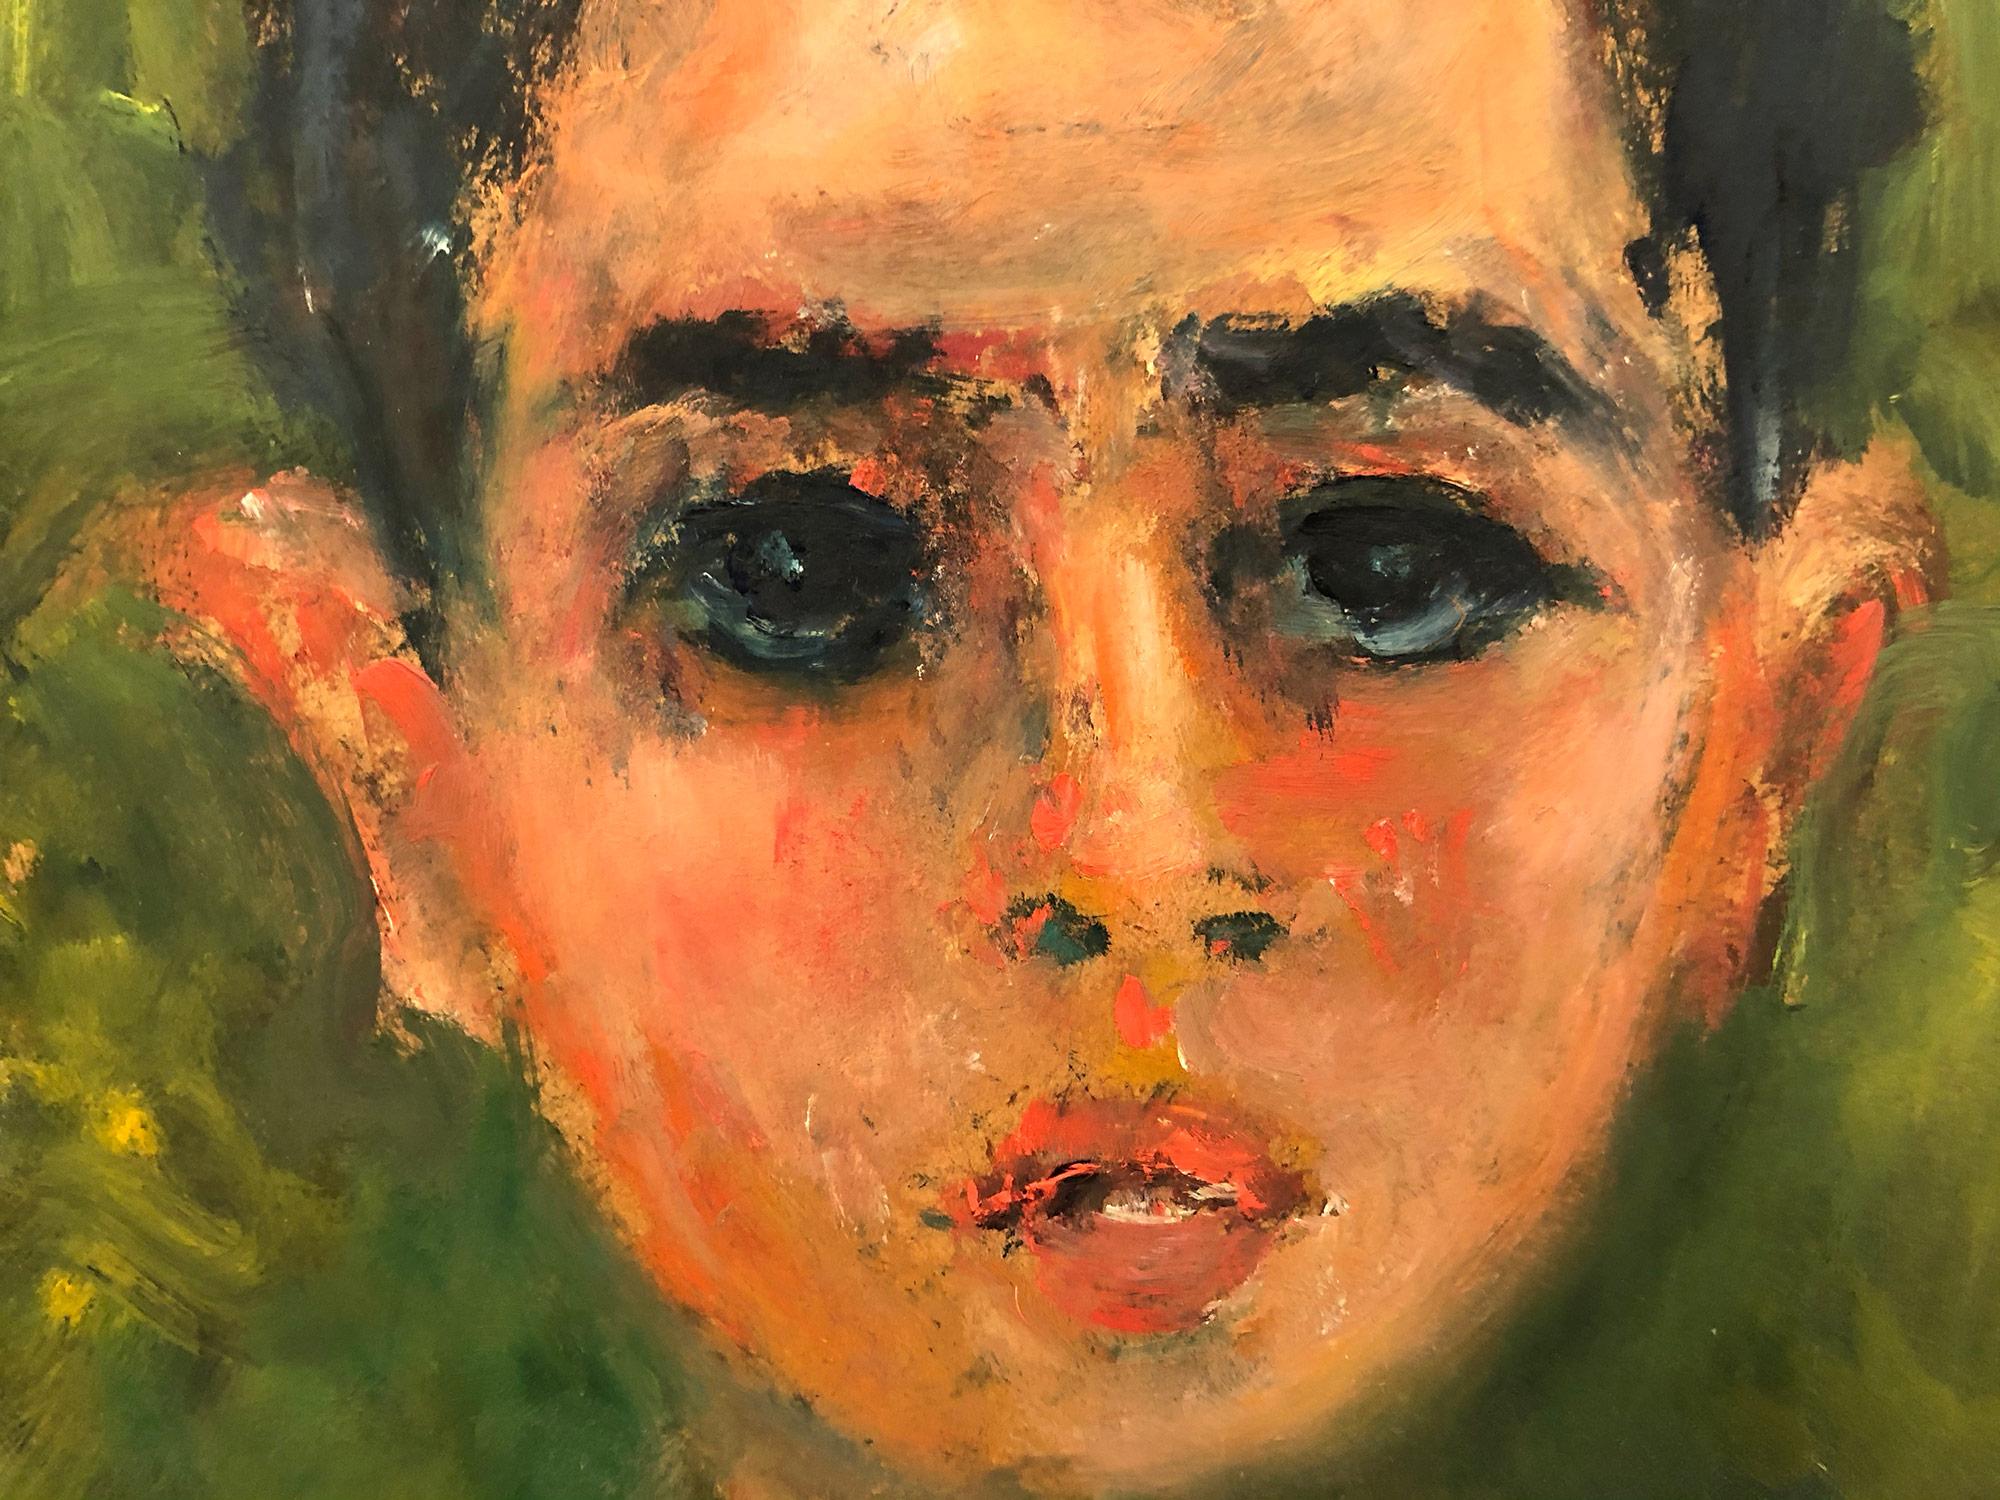 This painting depicts a whimsical portrait of a young boy with dark hair against a viridian green background. The bright colors and quick brush strokes are what make this painting so attractive and desirable. The piece is done in a highly